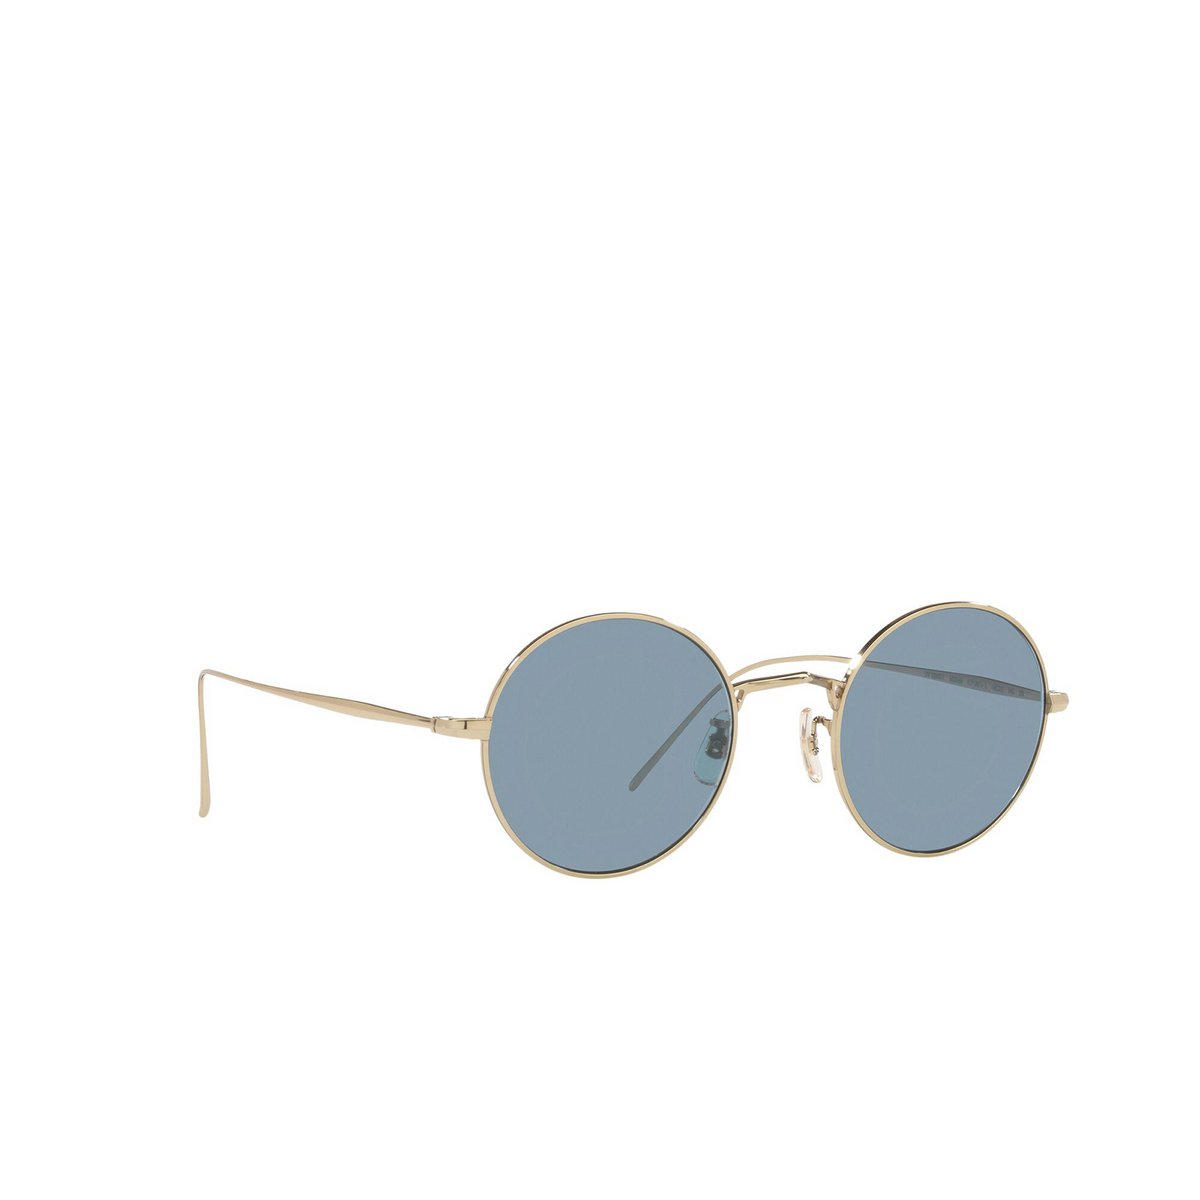 Oliver Peoples® Round Sunglasses: G. Ponti-3 OV1293ST color Soft Gold 503556 - three-quarters view.